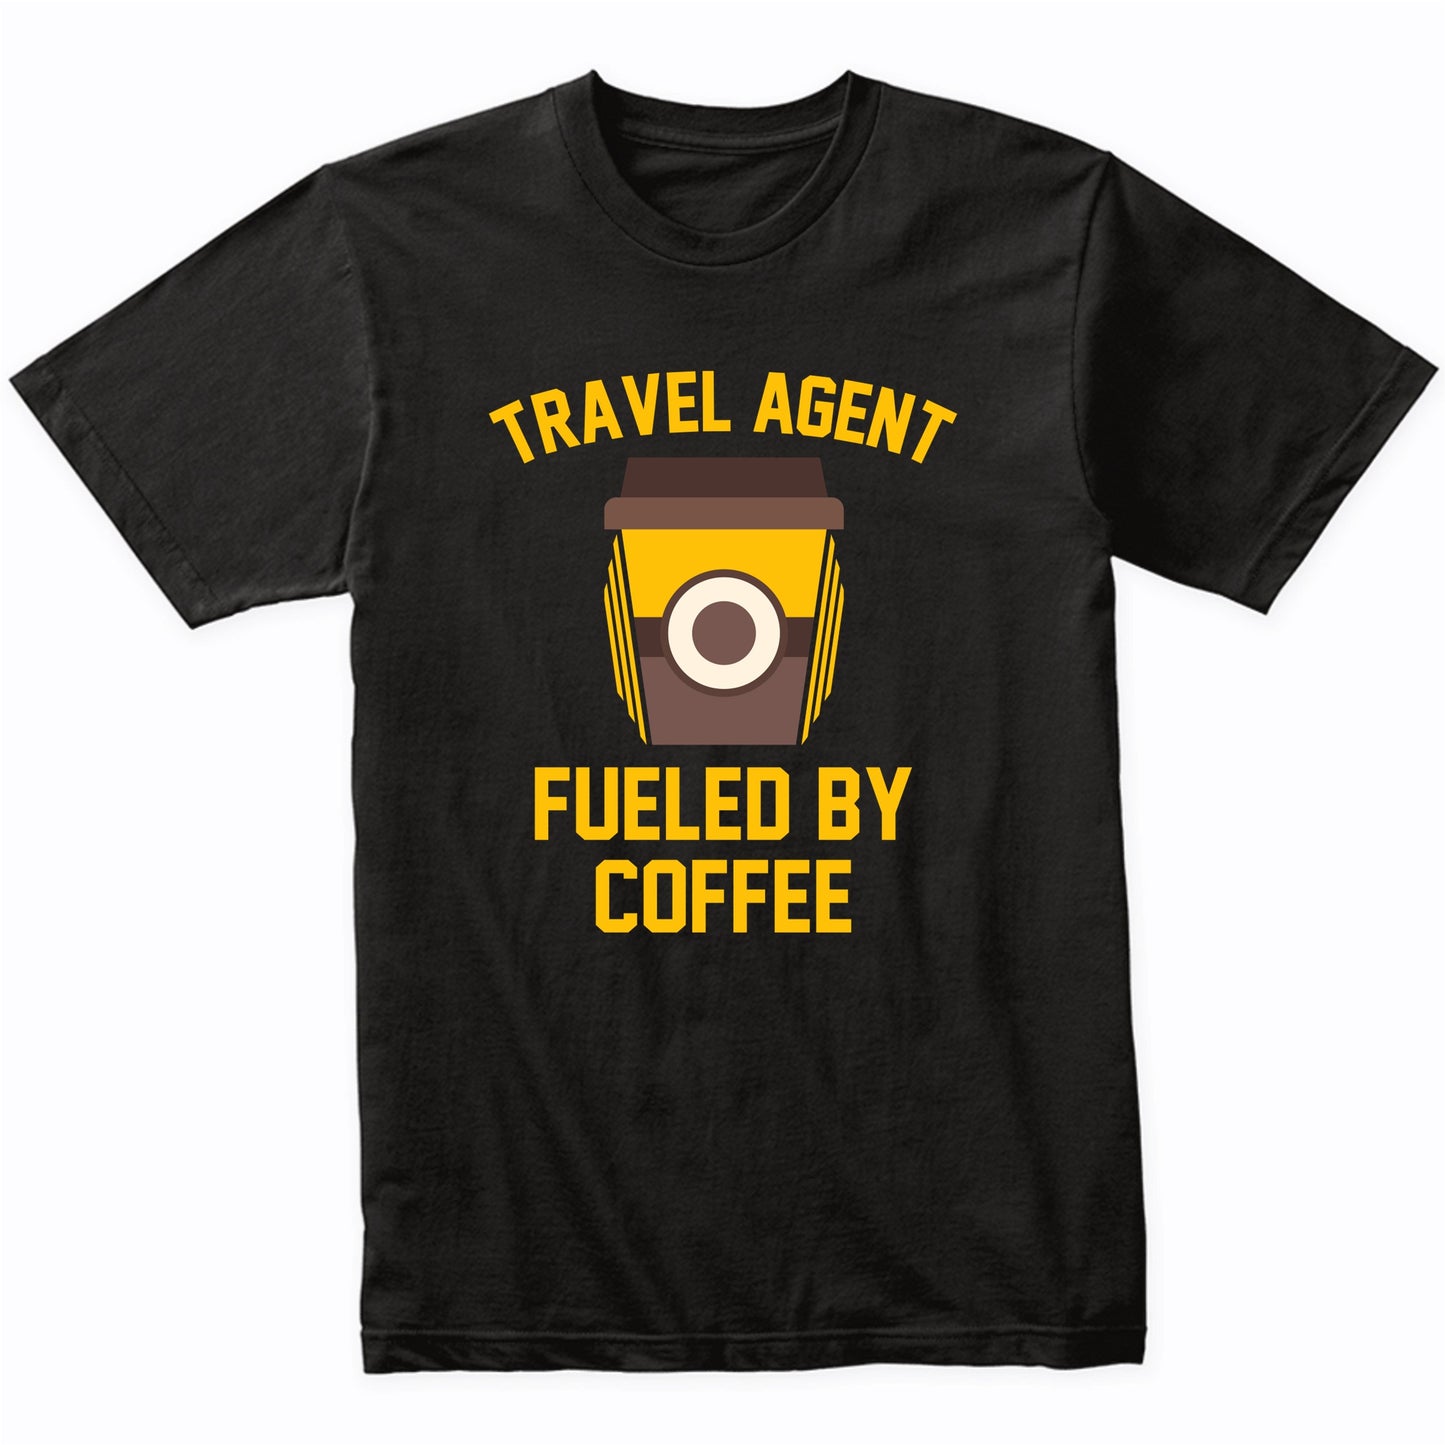 Travel Agent Fueled By Coffee Funny Shirt